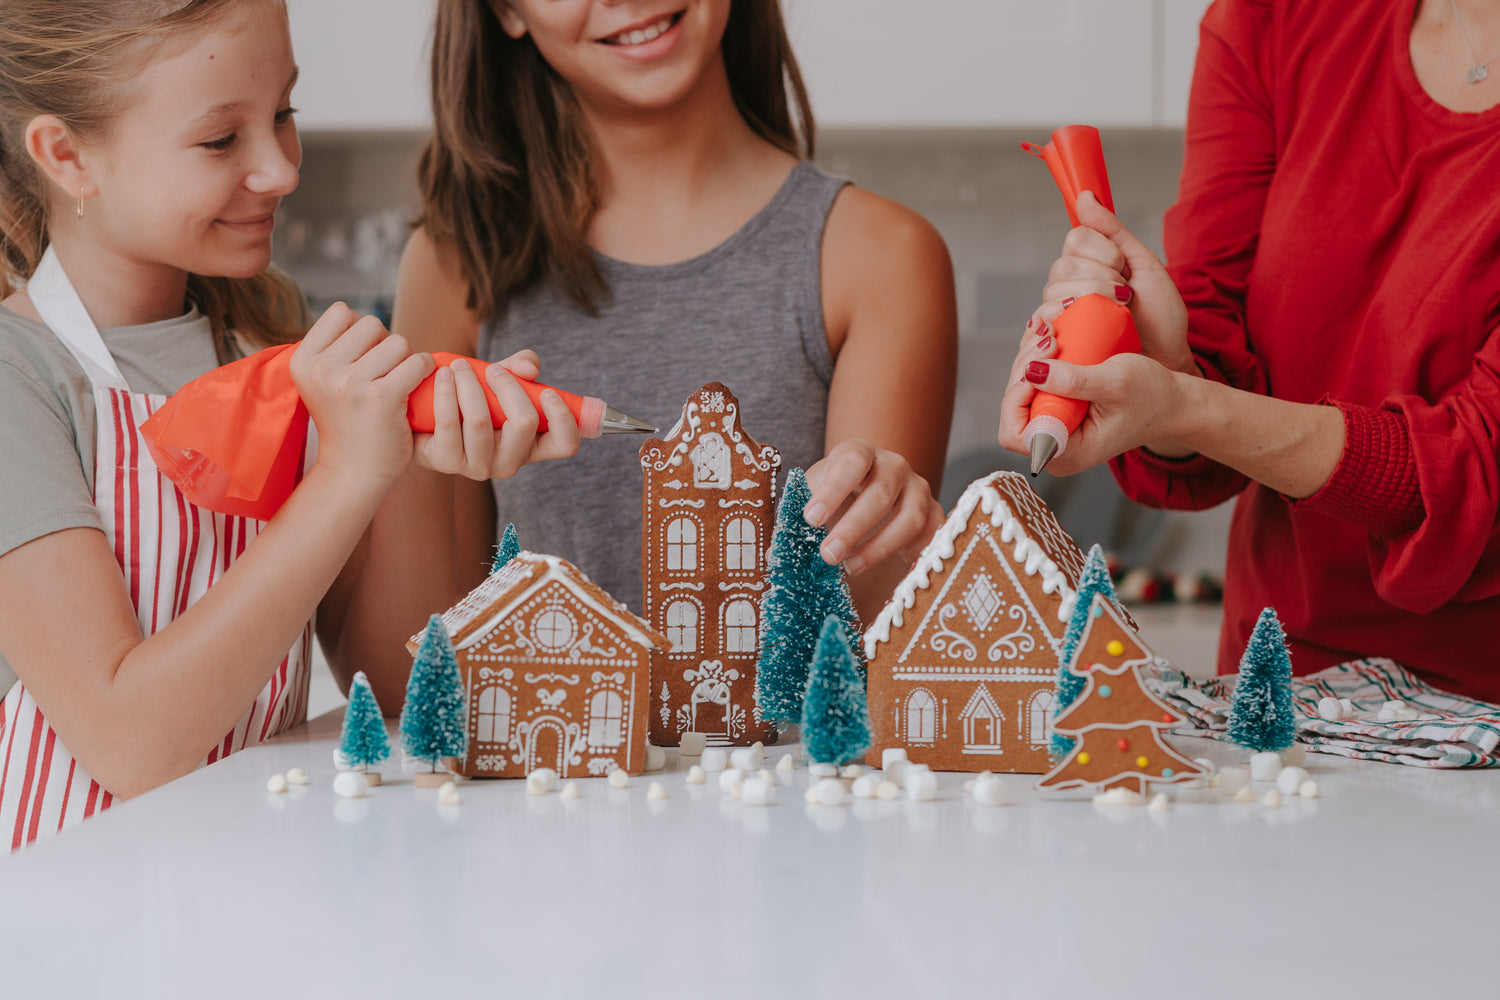 Lifestyle of adult and children decorating gingerbread village made with Make Your Own Gingerbread Village set